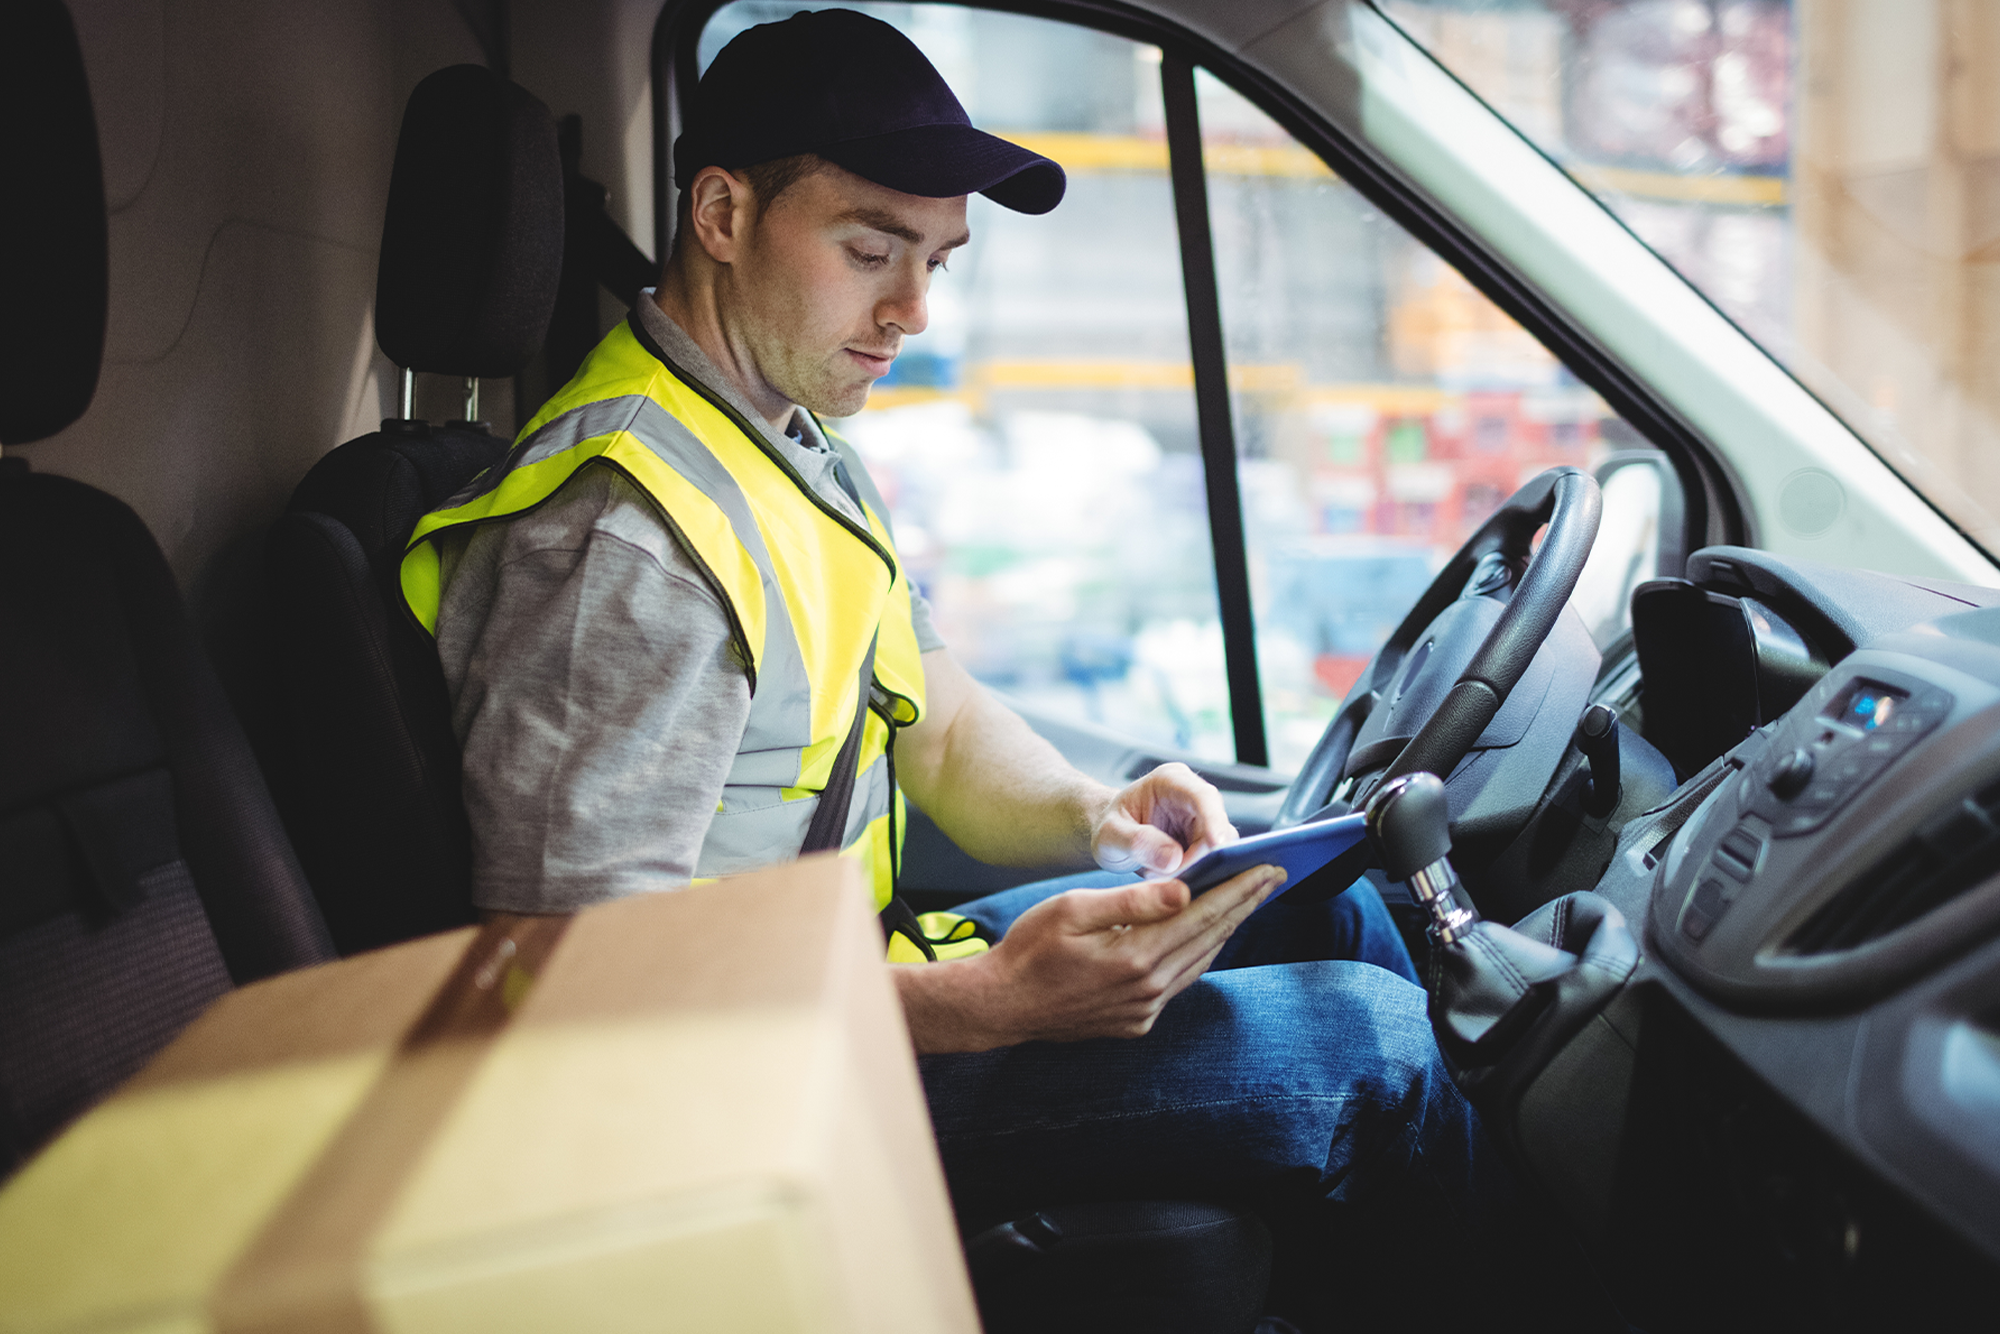 Steps for Businesses to Create Safer Drivers: A male driver sitting in his commercial vehicle going over a safety checklist.